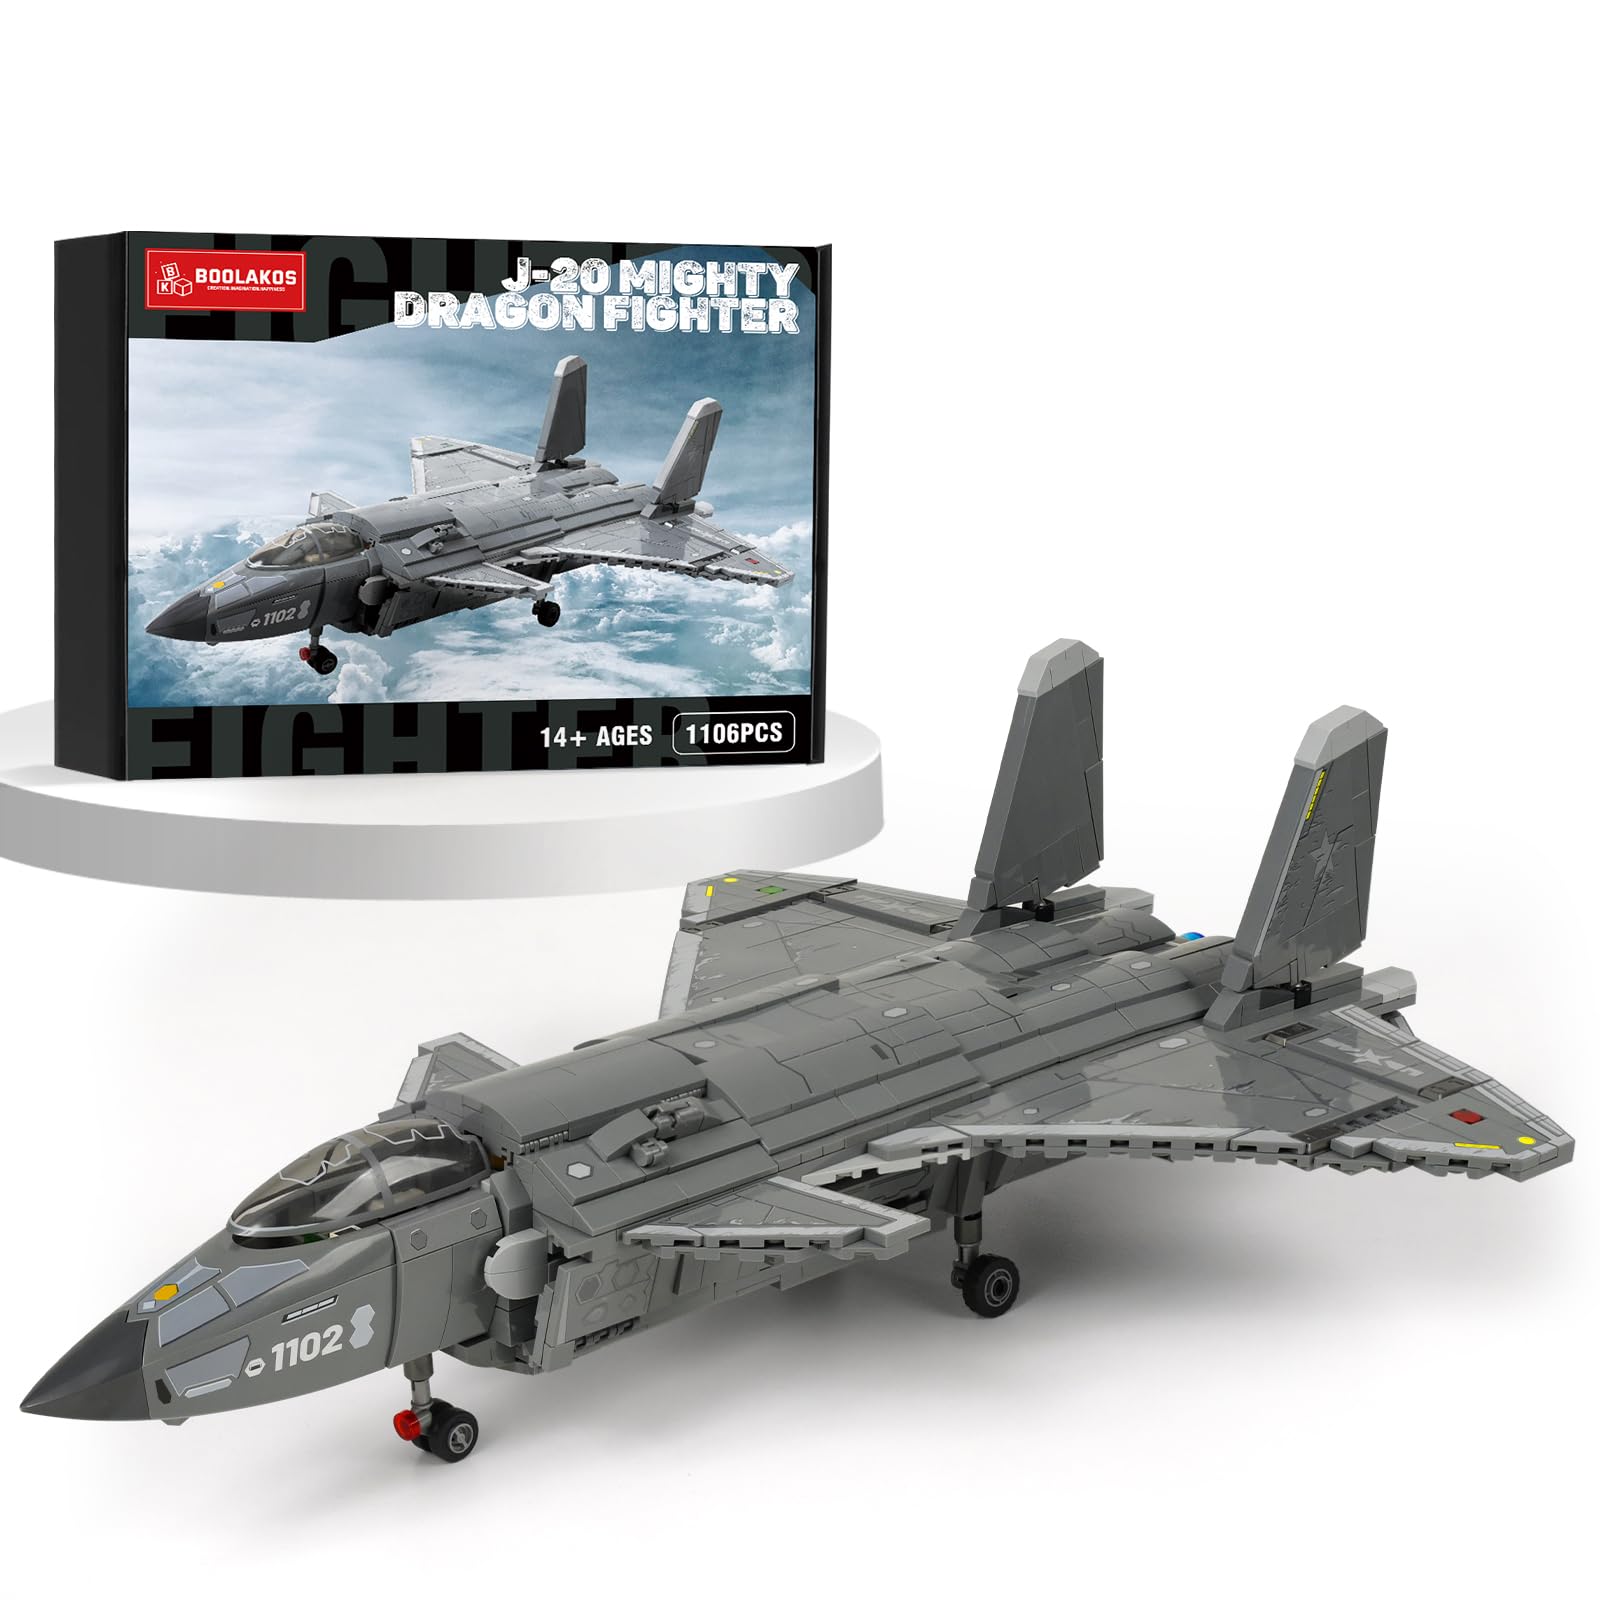 BOOLAKOS J-20 Mighty Dragon Fighter, Air Force Fighter Jet Building Block Set, Military Aircraft Display Model Toy for Adult Gift Giving (1,106 Pieces)